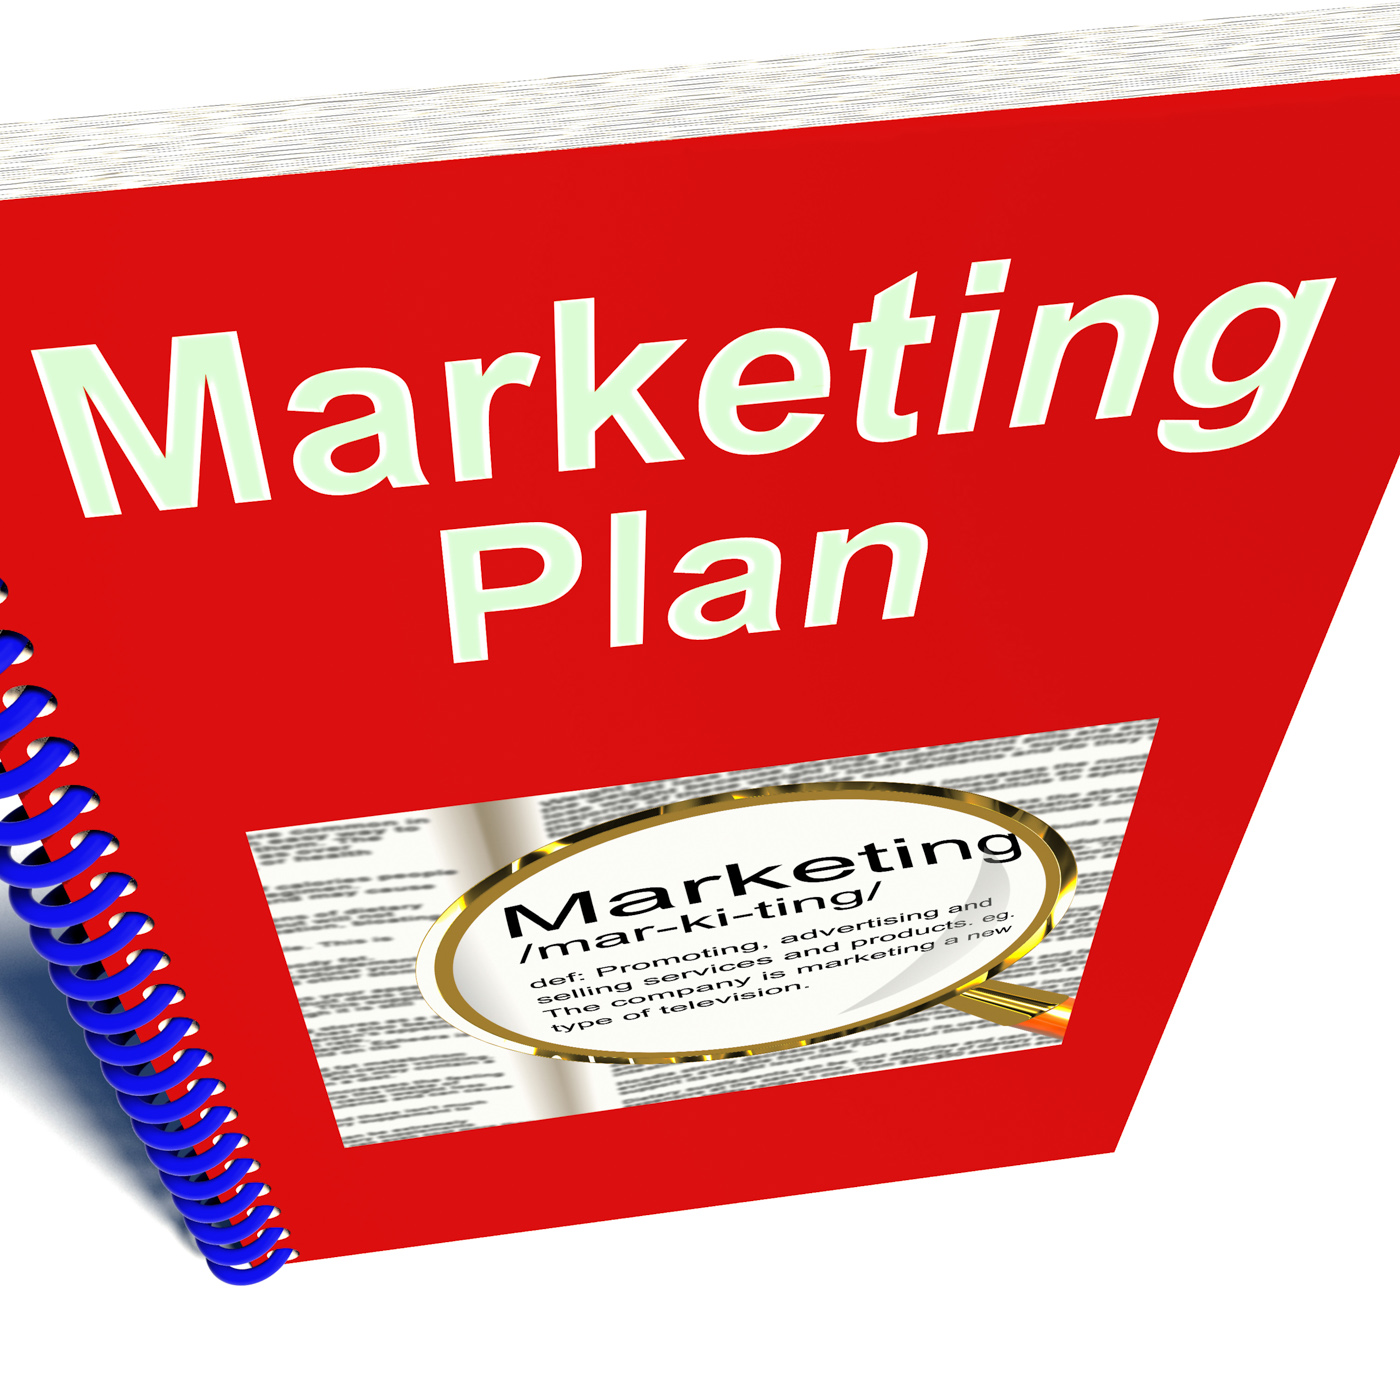 Marketing plan book for promotion strategy photo